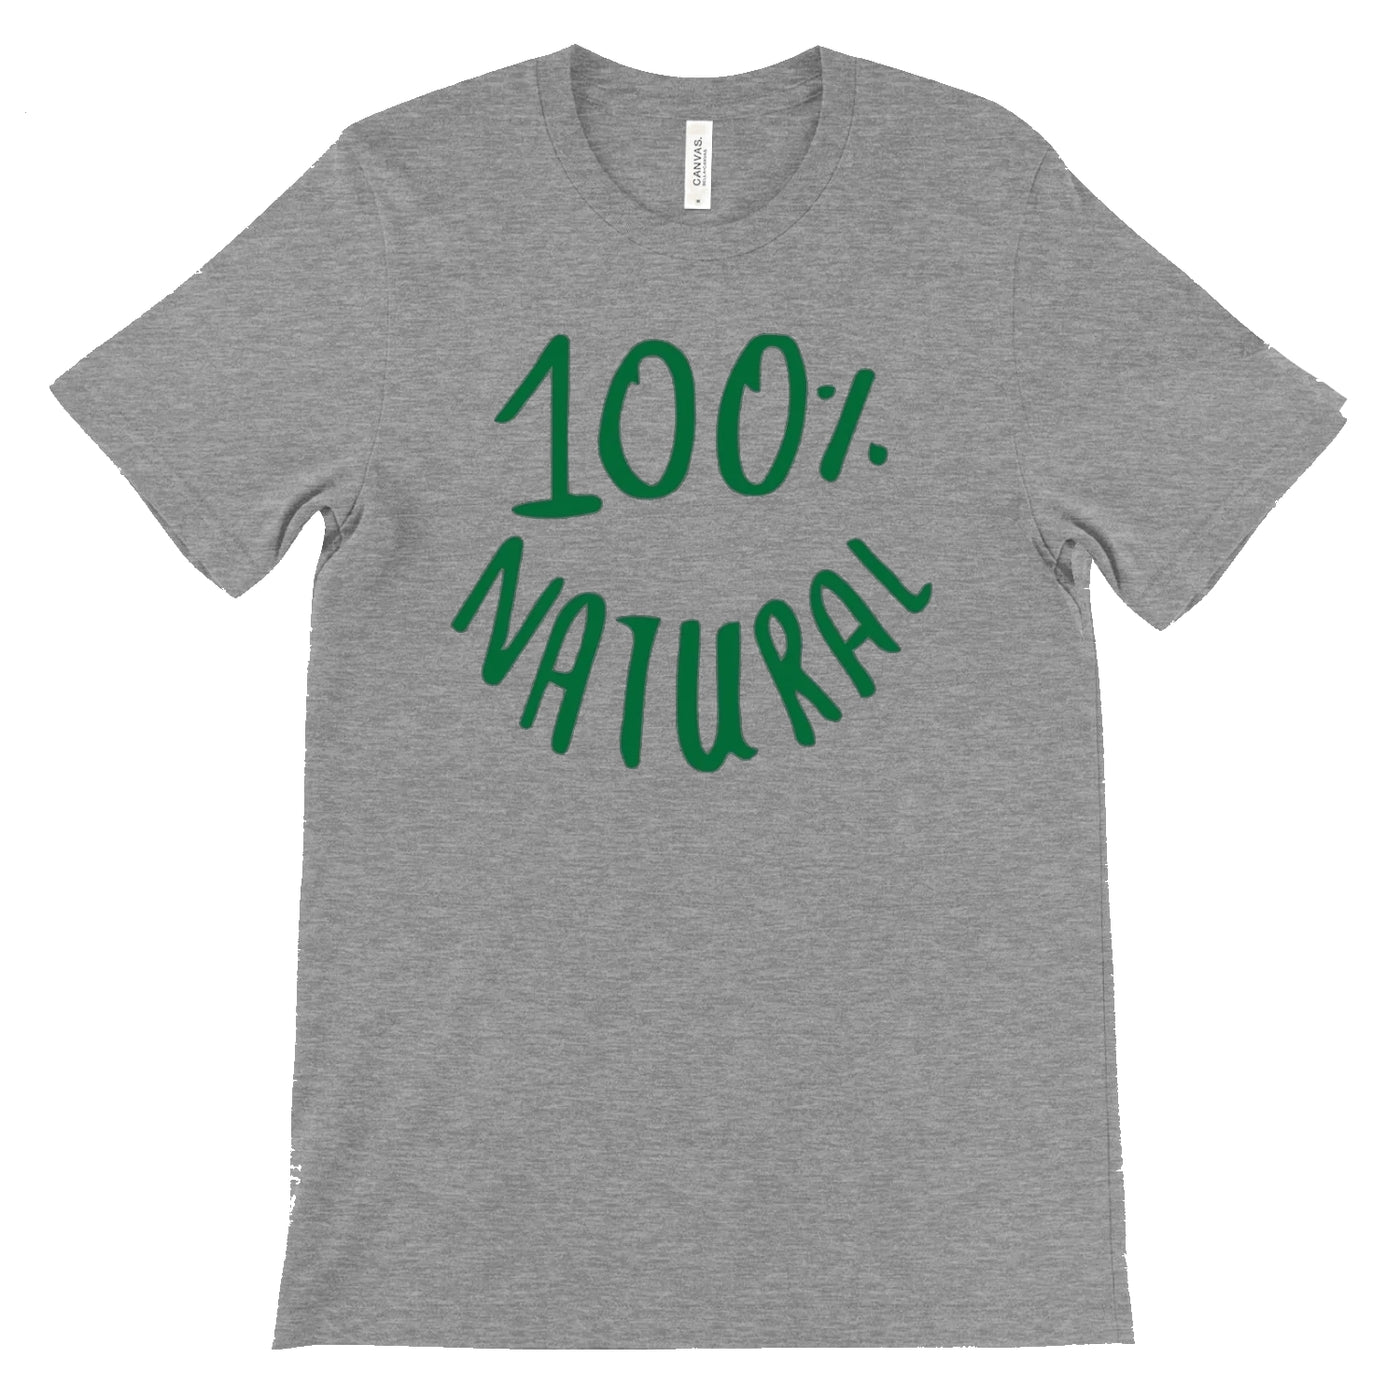 Vale 100% Natural - Unisex Jersey Tee